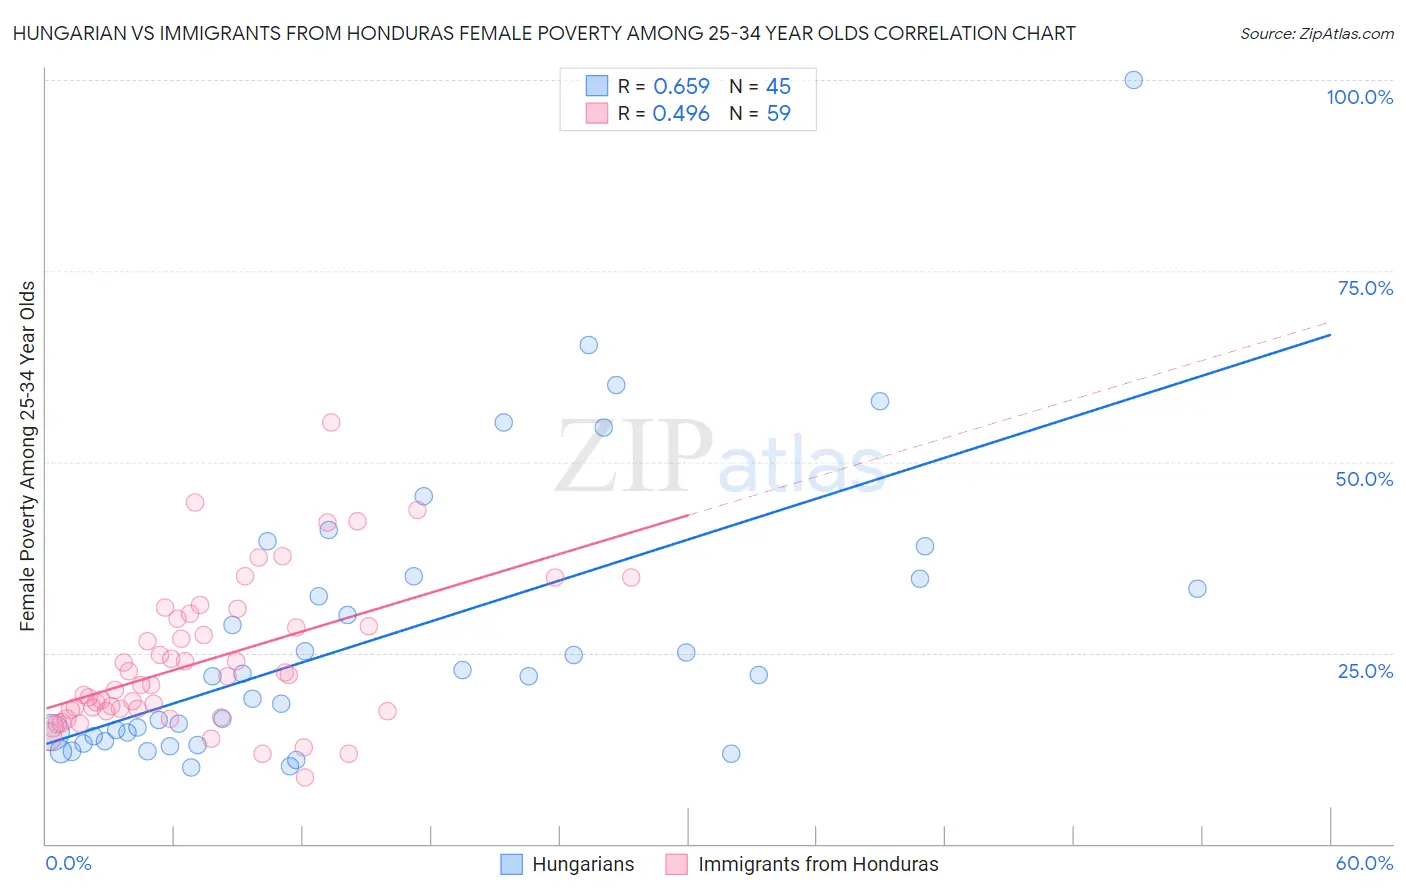 Hungarian vs Immigrants from Honduras Female Poverty Among 25-34 Year Olds